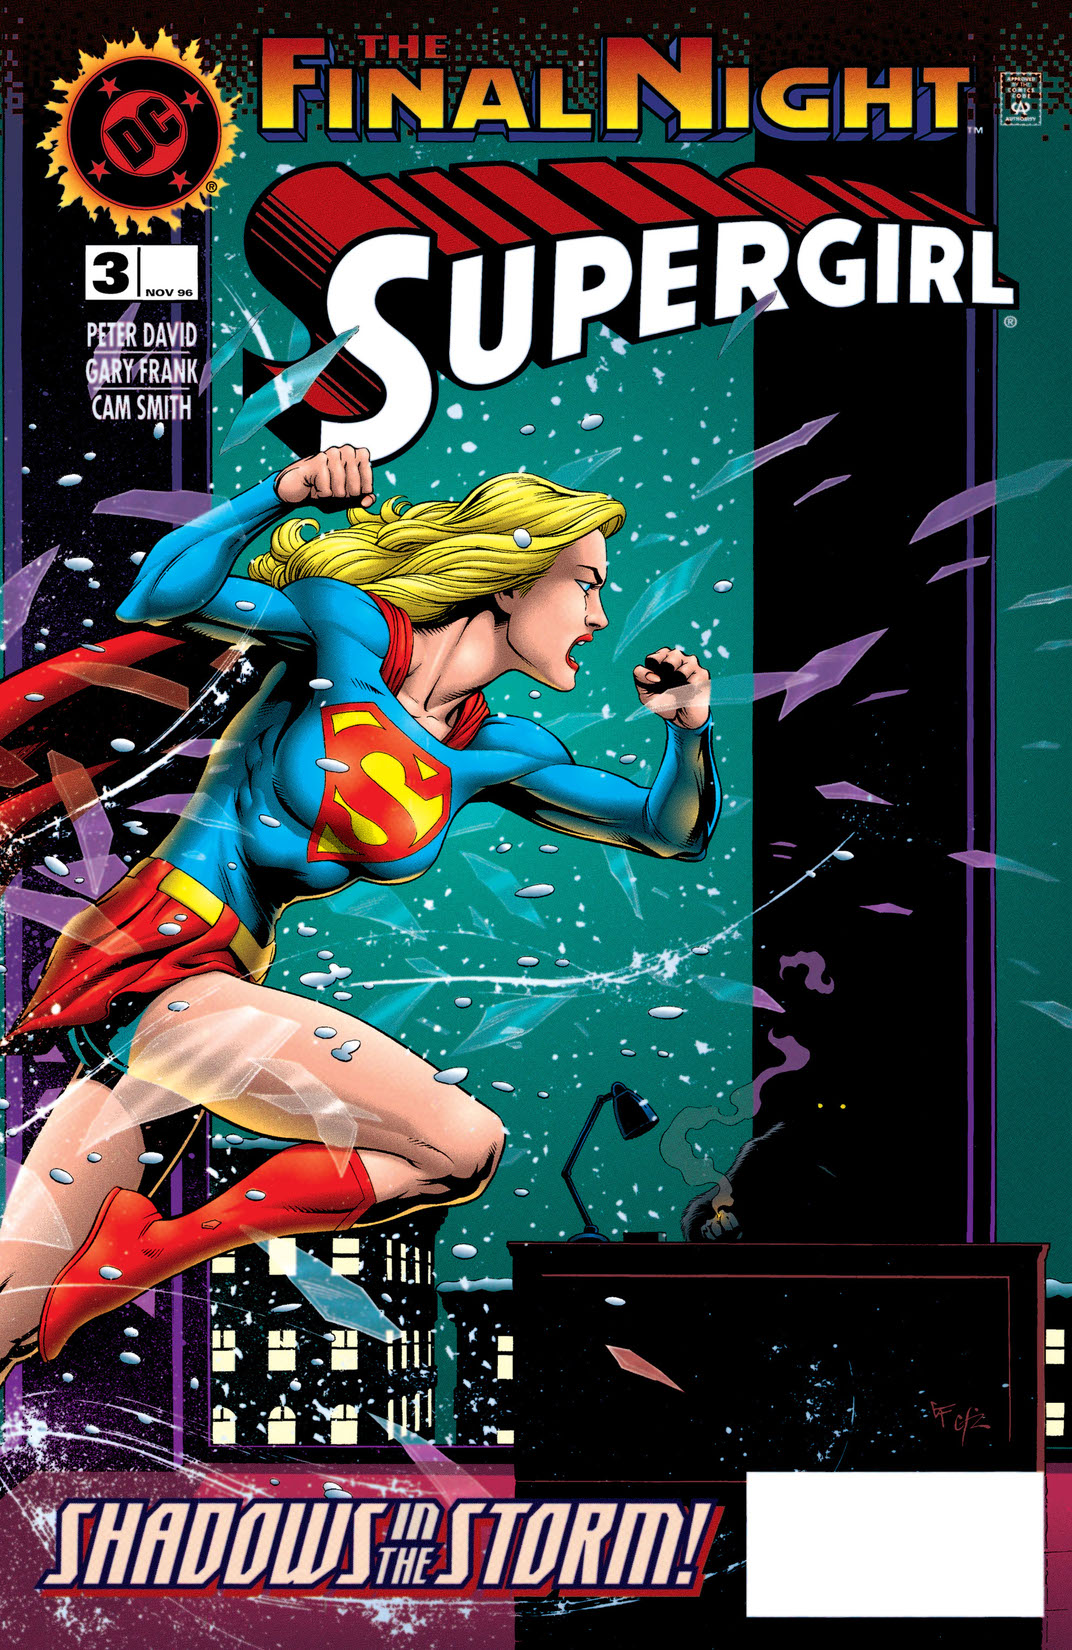 Supergirl (1996-) #3 preview images